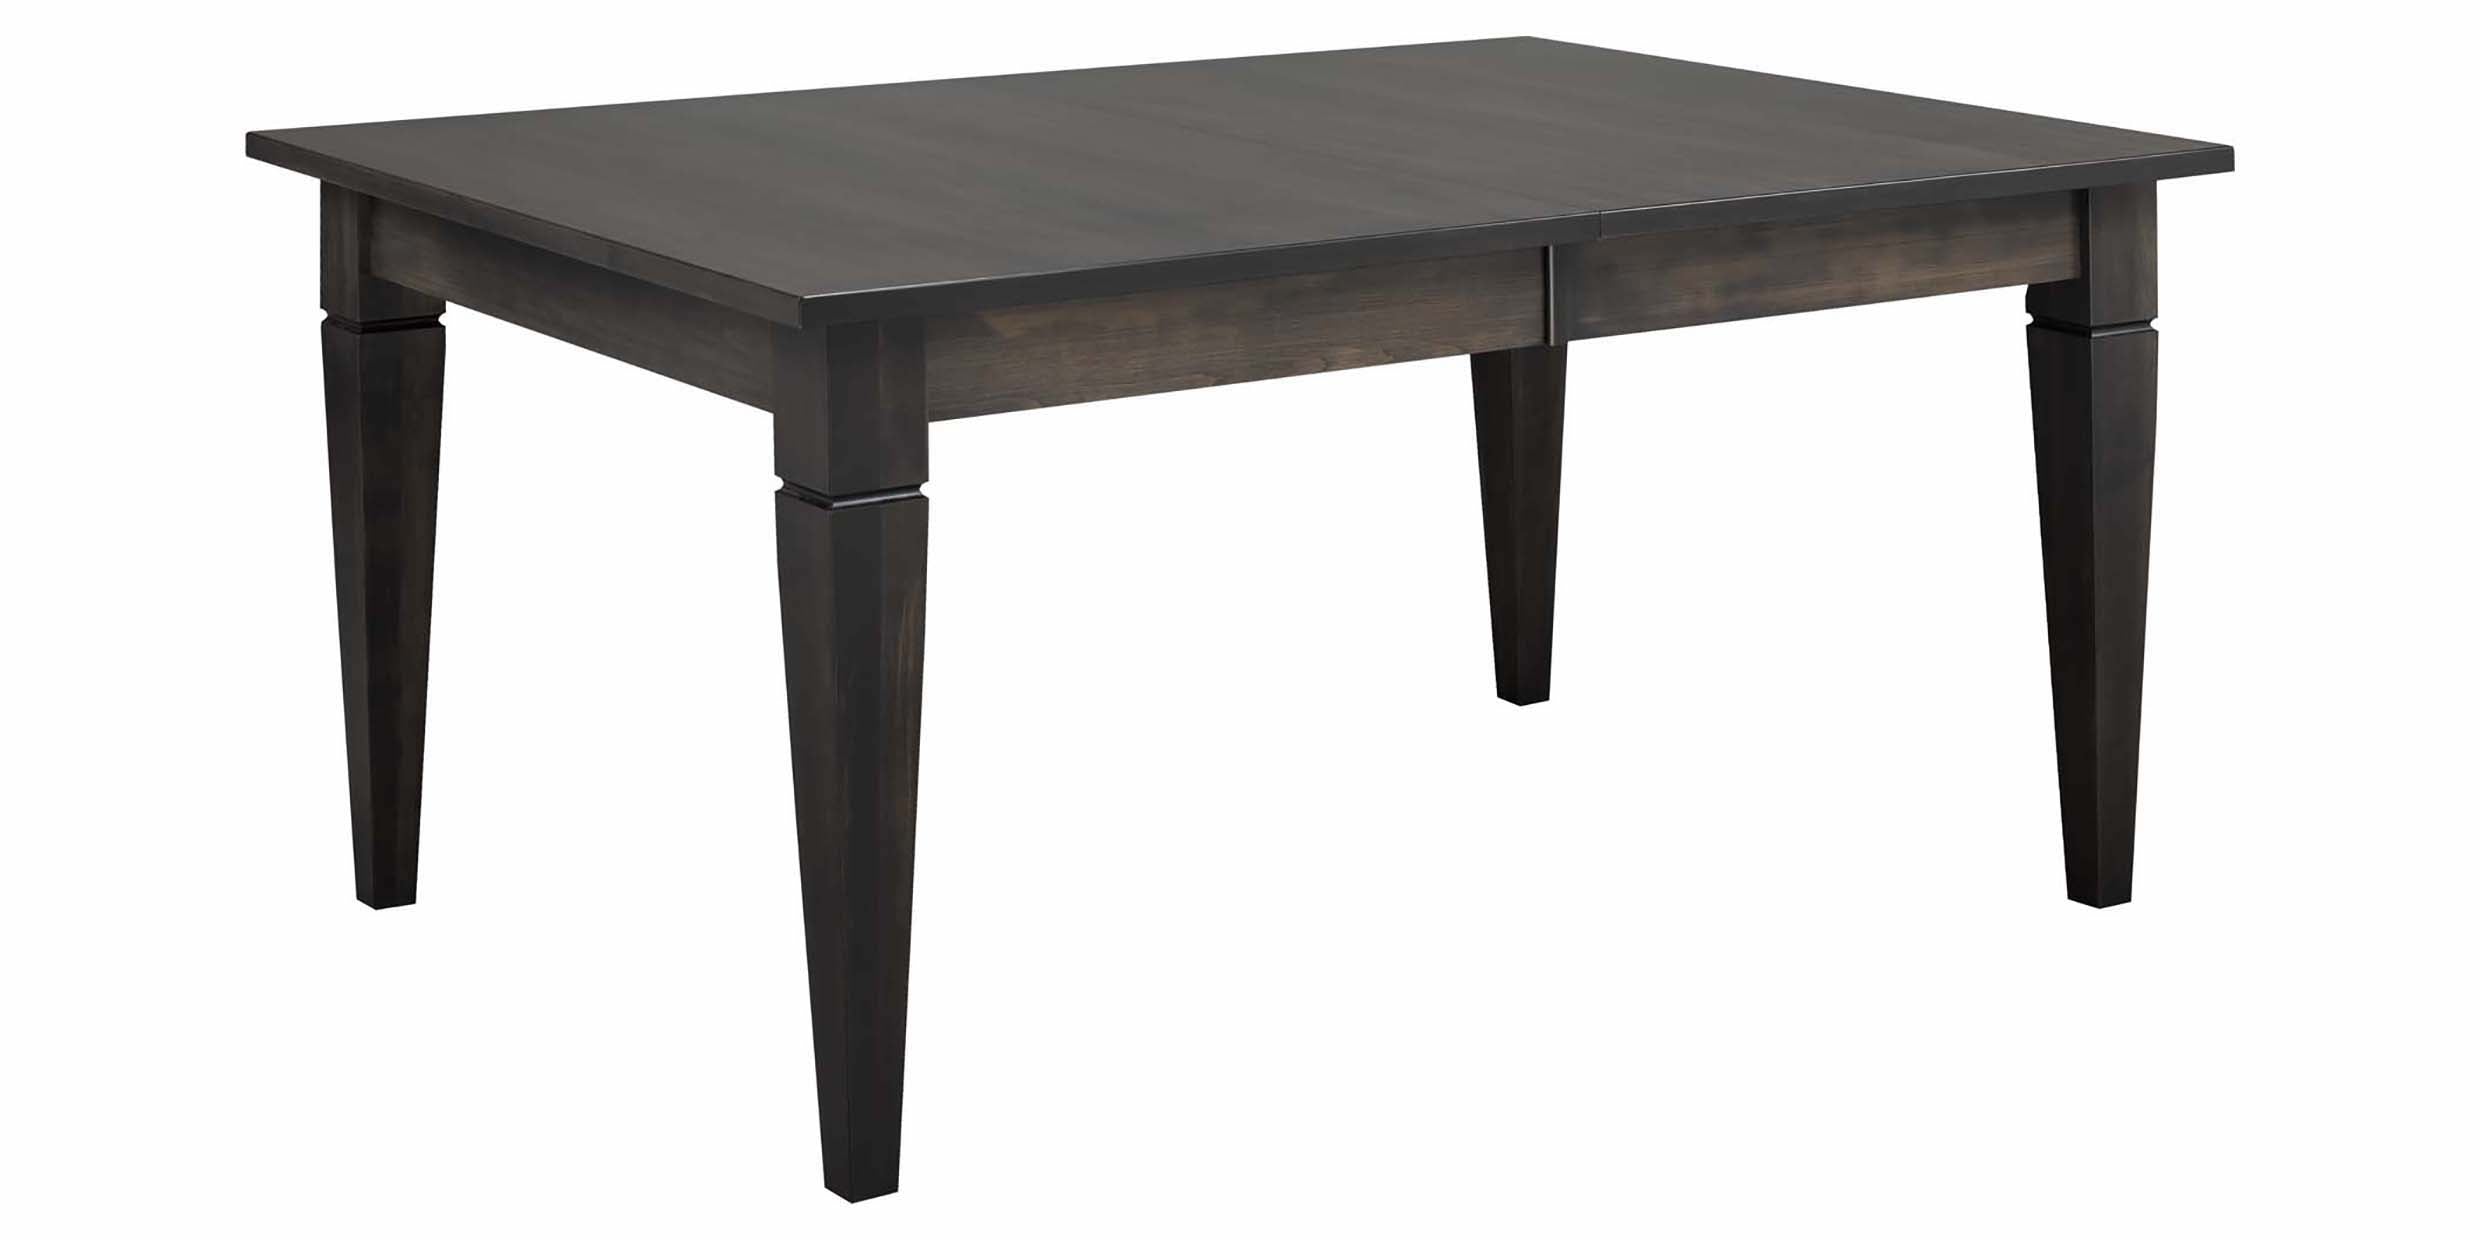 Table as Shown | Cardinal Woodcraft Reesor Dining Table | Valley Ridge Furniture